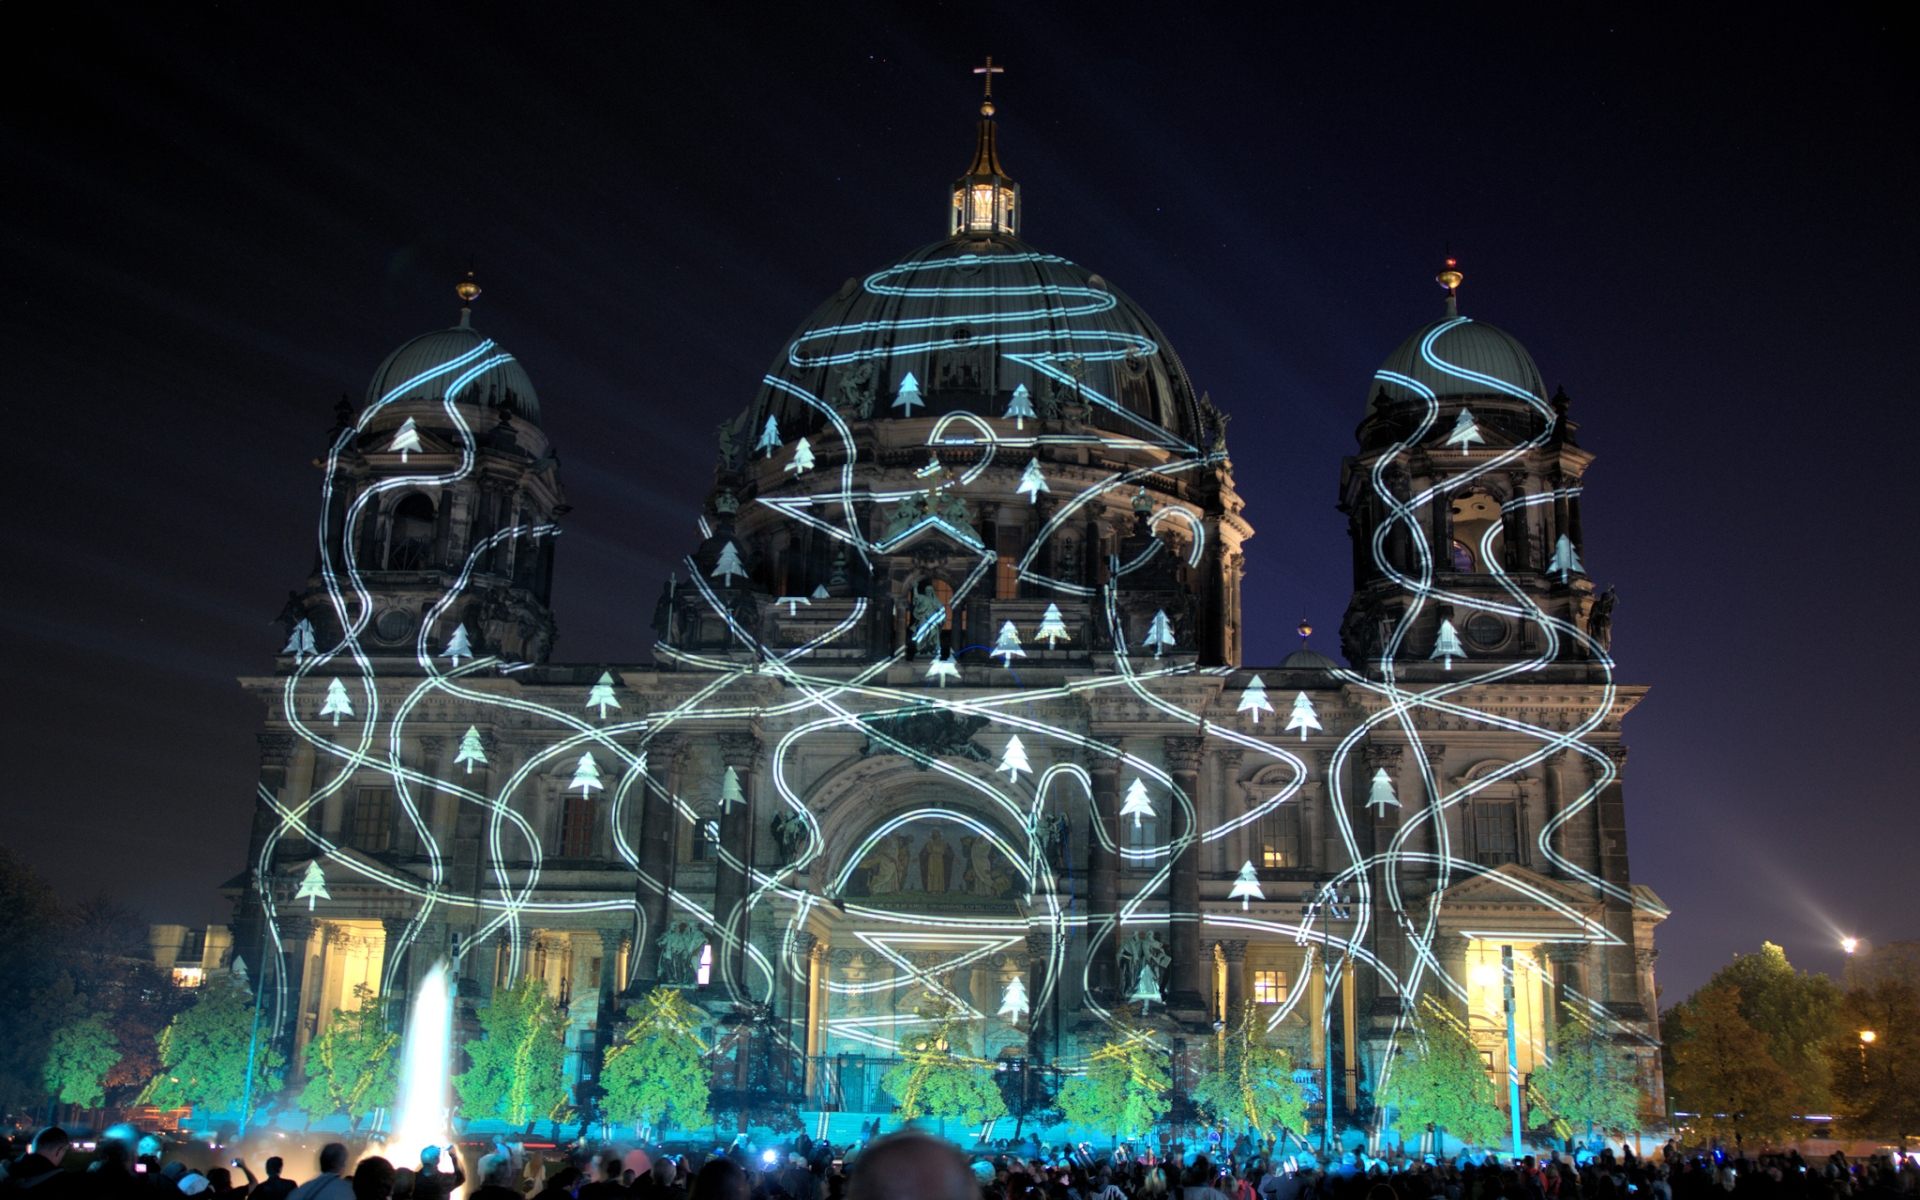 The Berlin Festival of Lights event - The Golden Scope